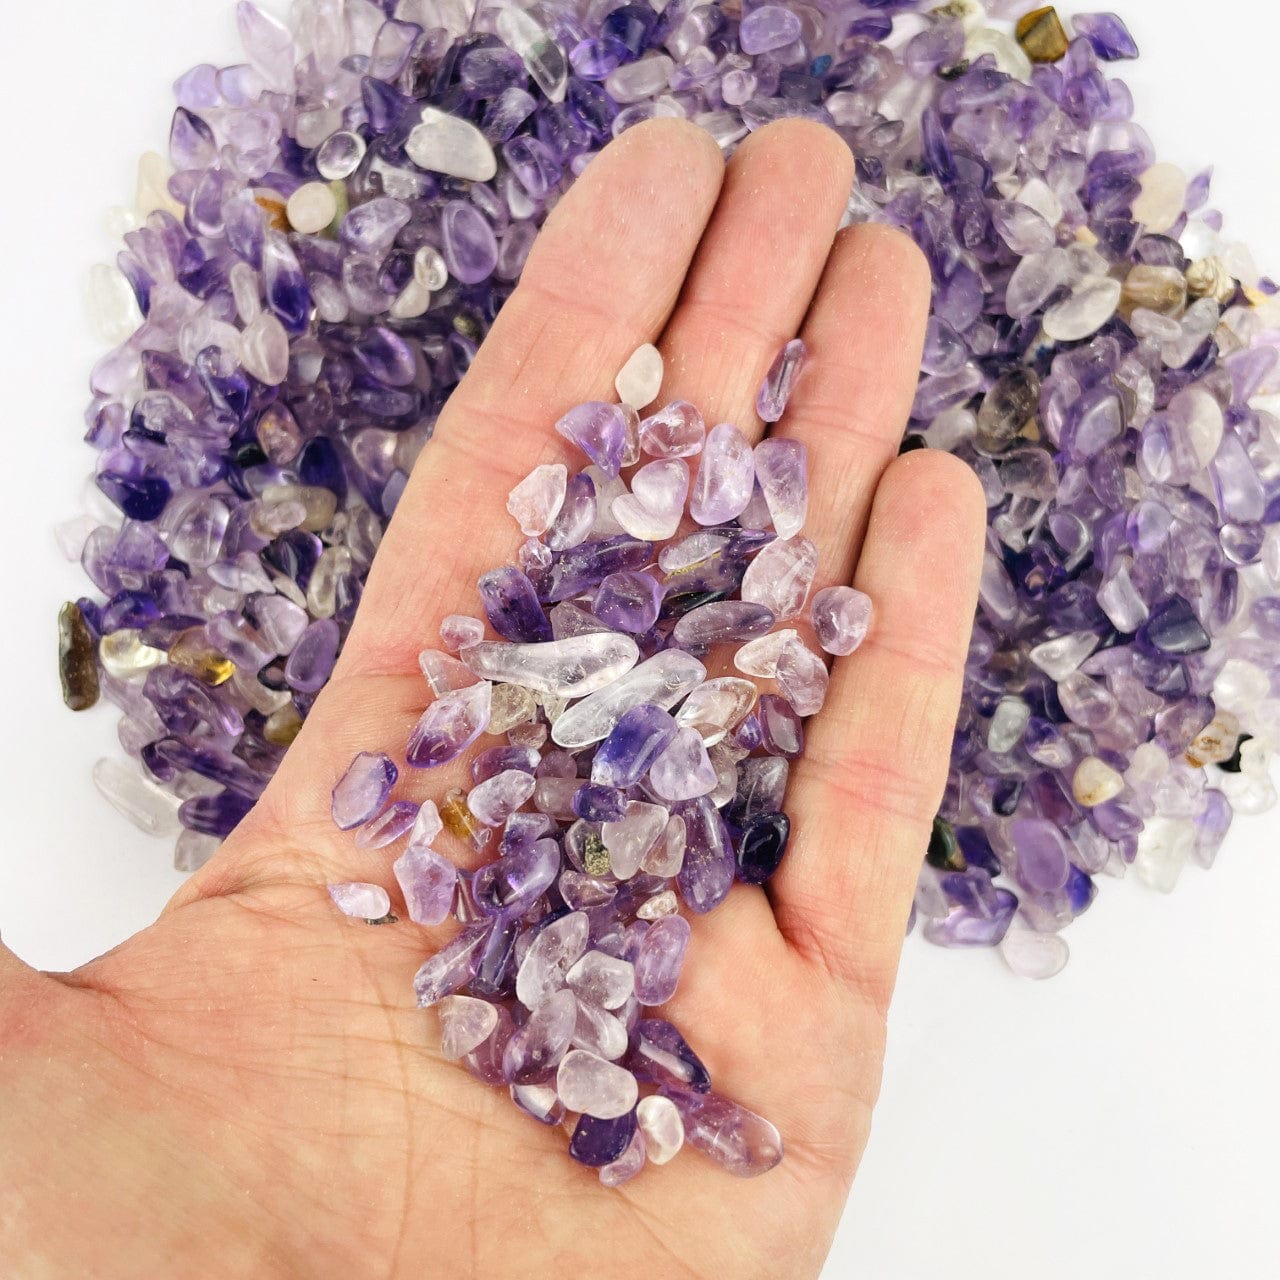  Amethyst Polished Small Chip Stones in a hand for size reference, with other stones behind